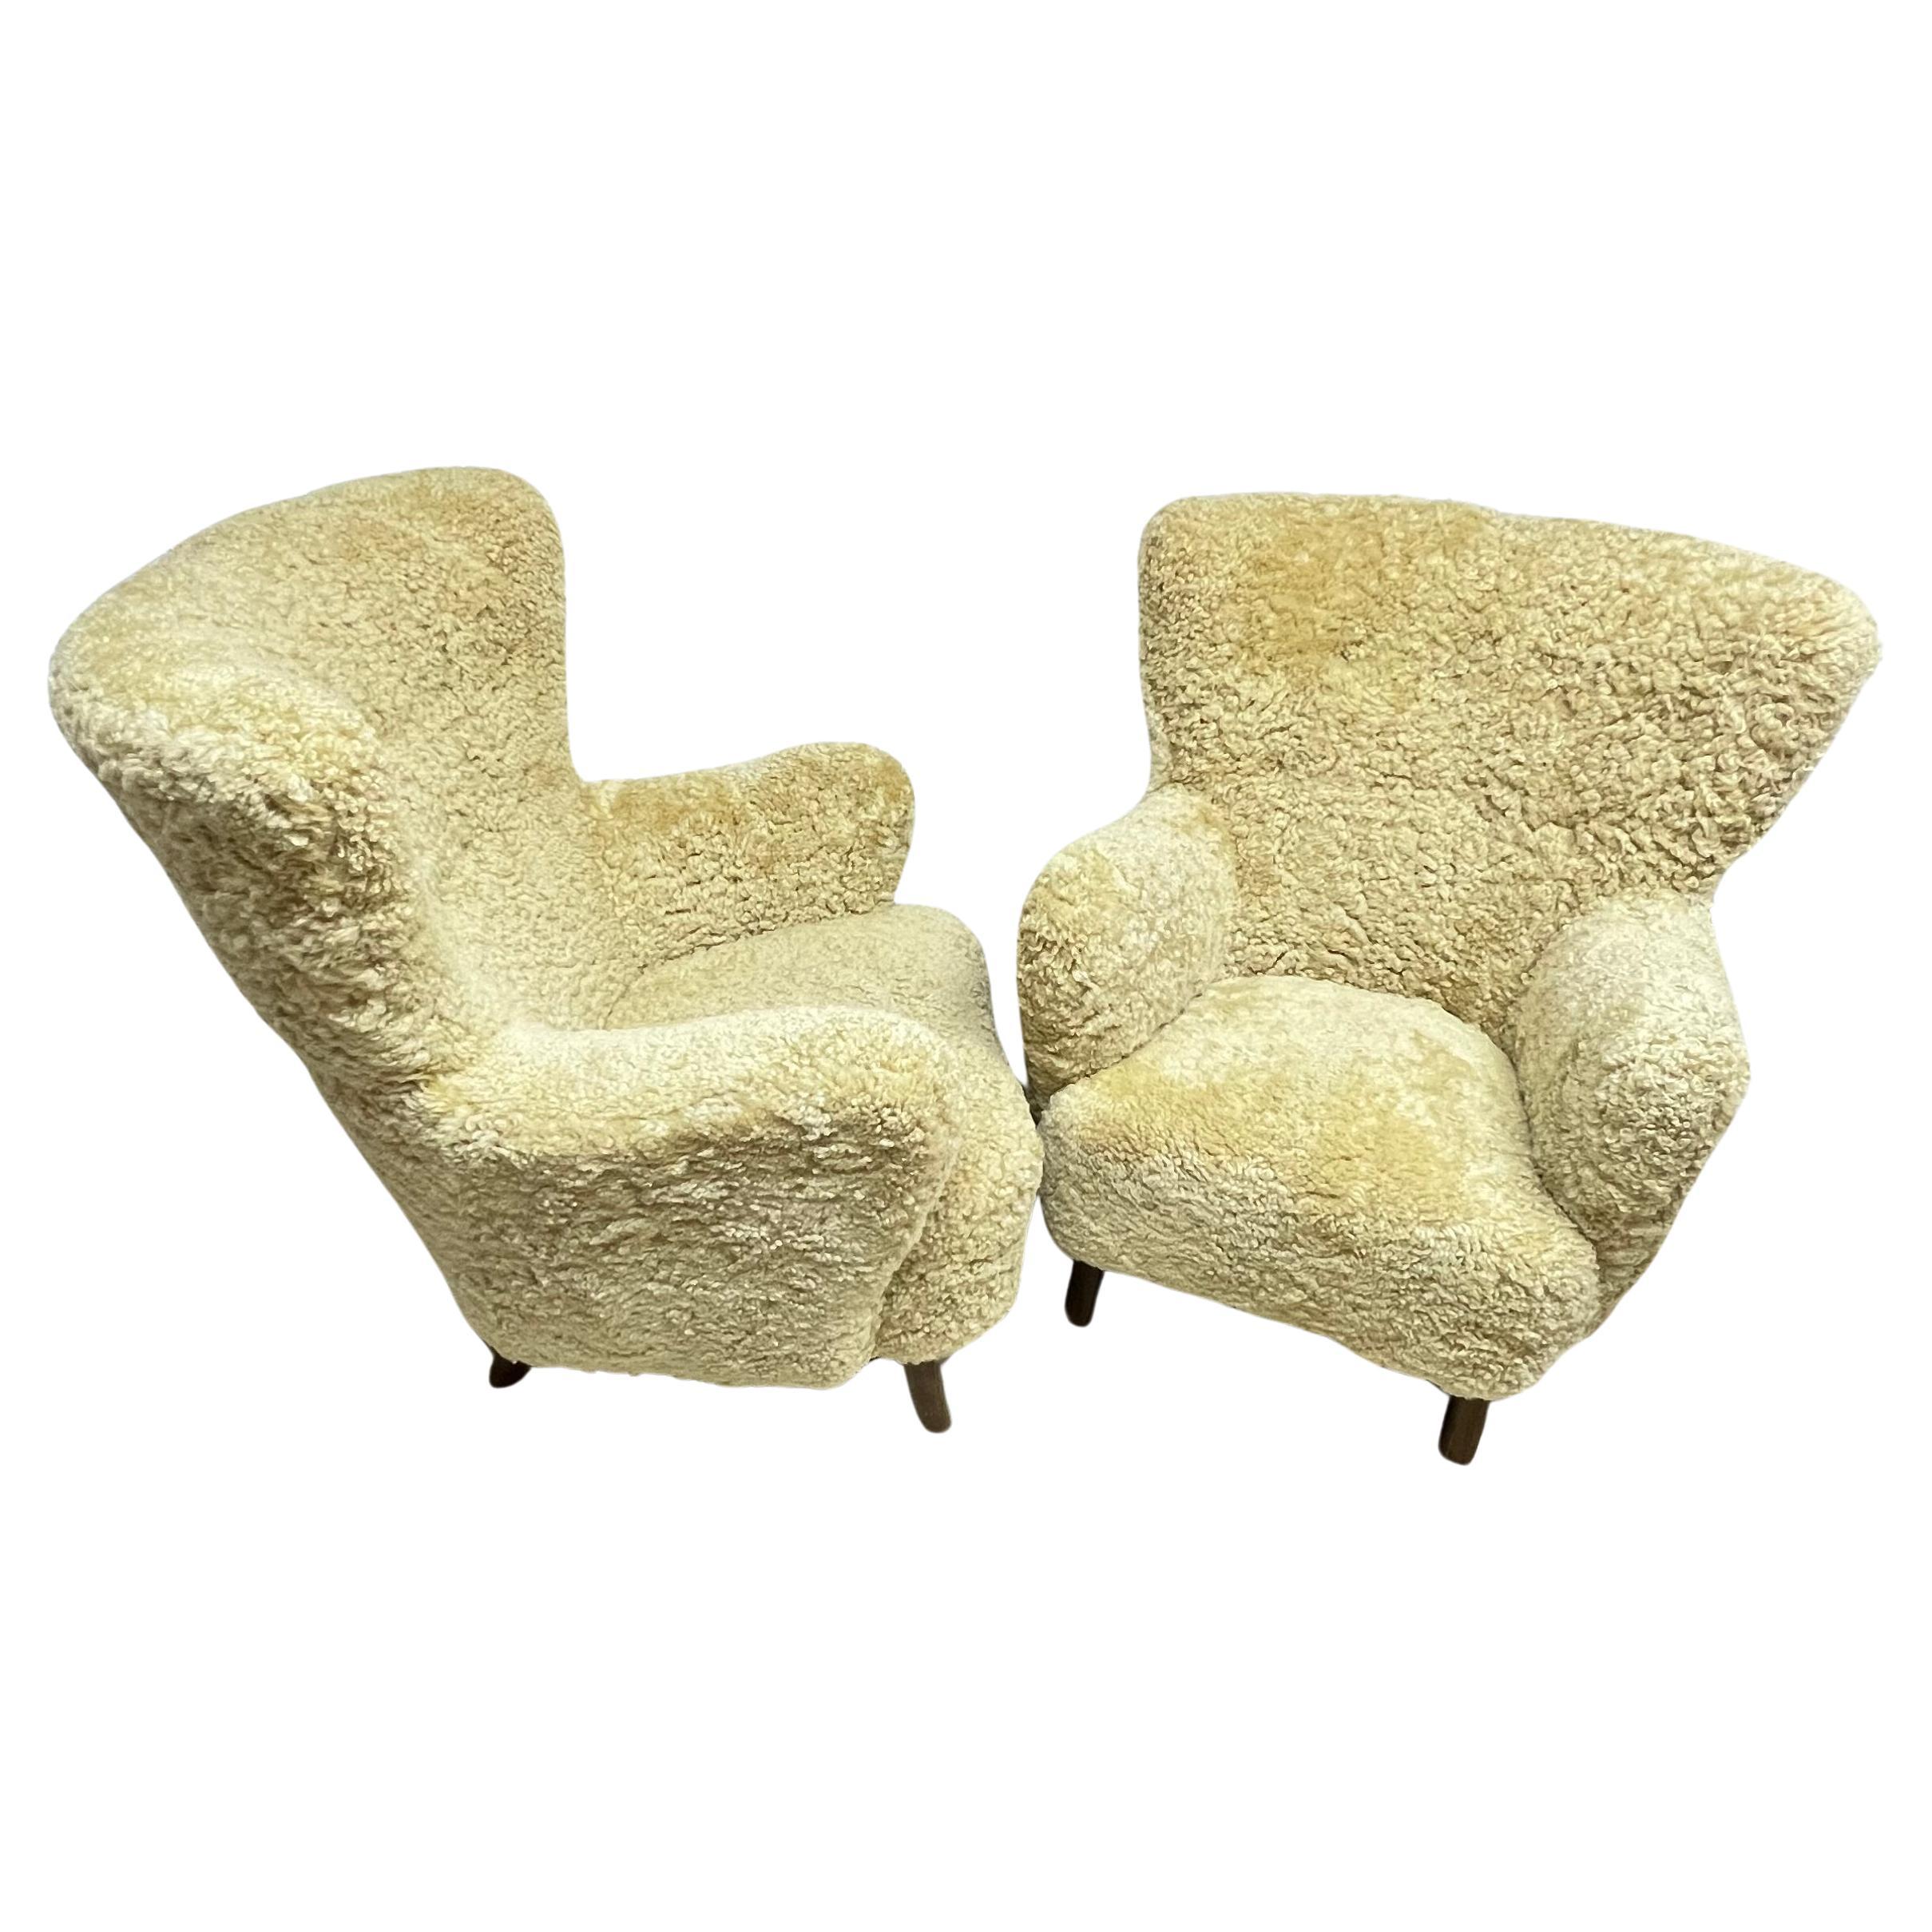 Pair of Shearling Chairs by Alfred Christensen, Denmark circa 1950 For Sale 3